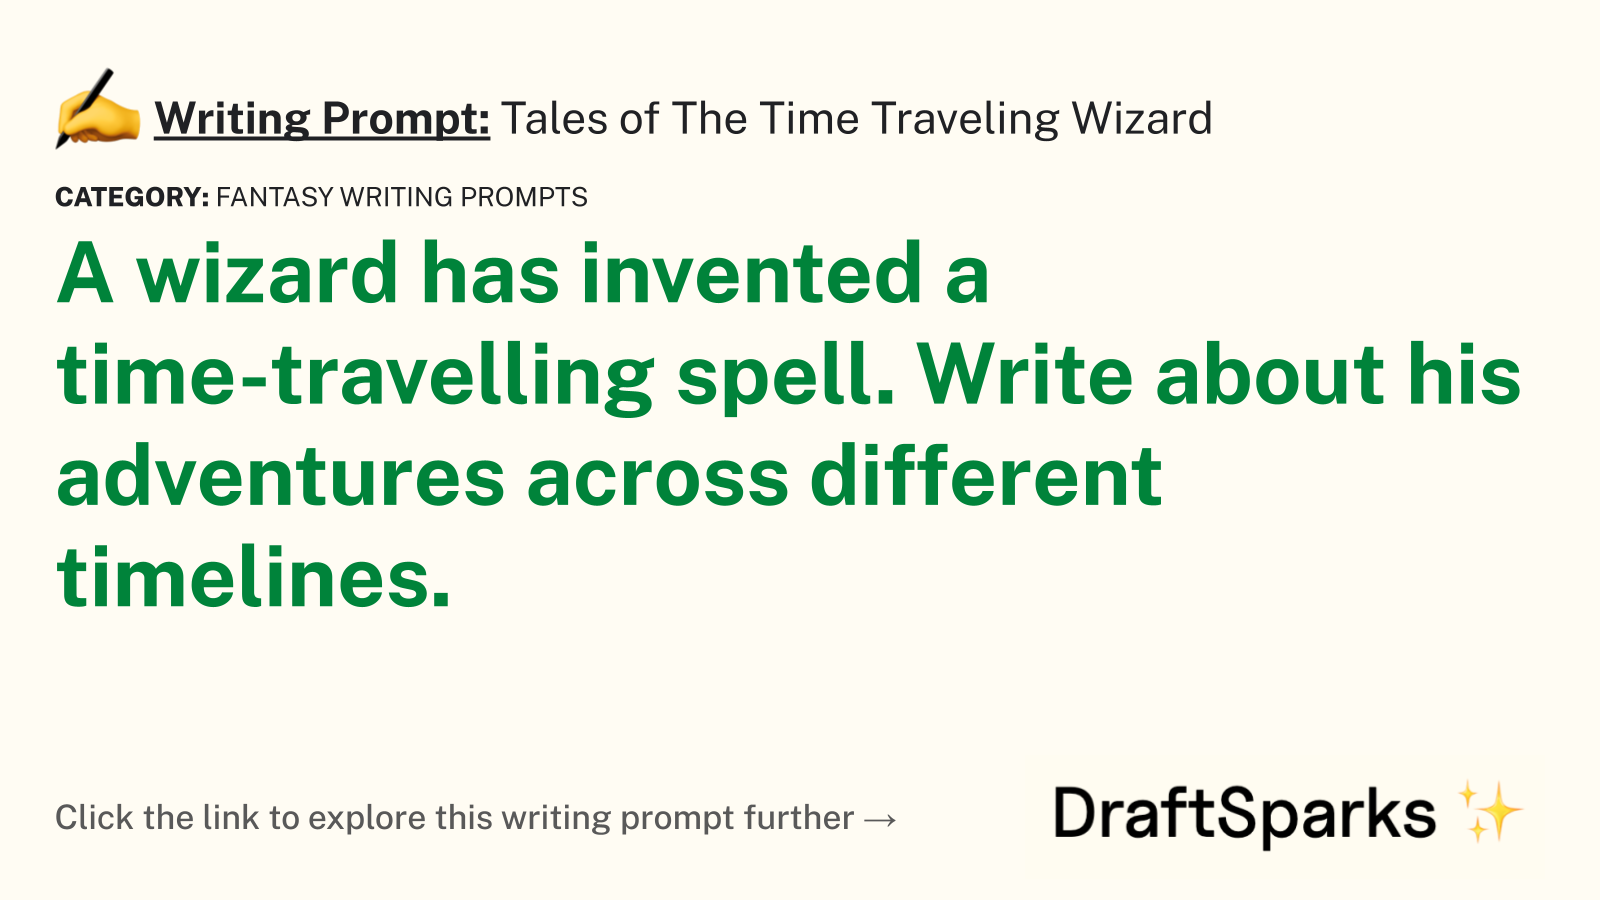 Tales of The Time Traveling Wizard